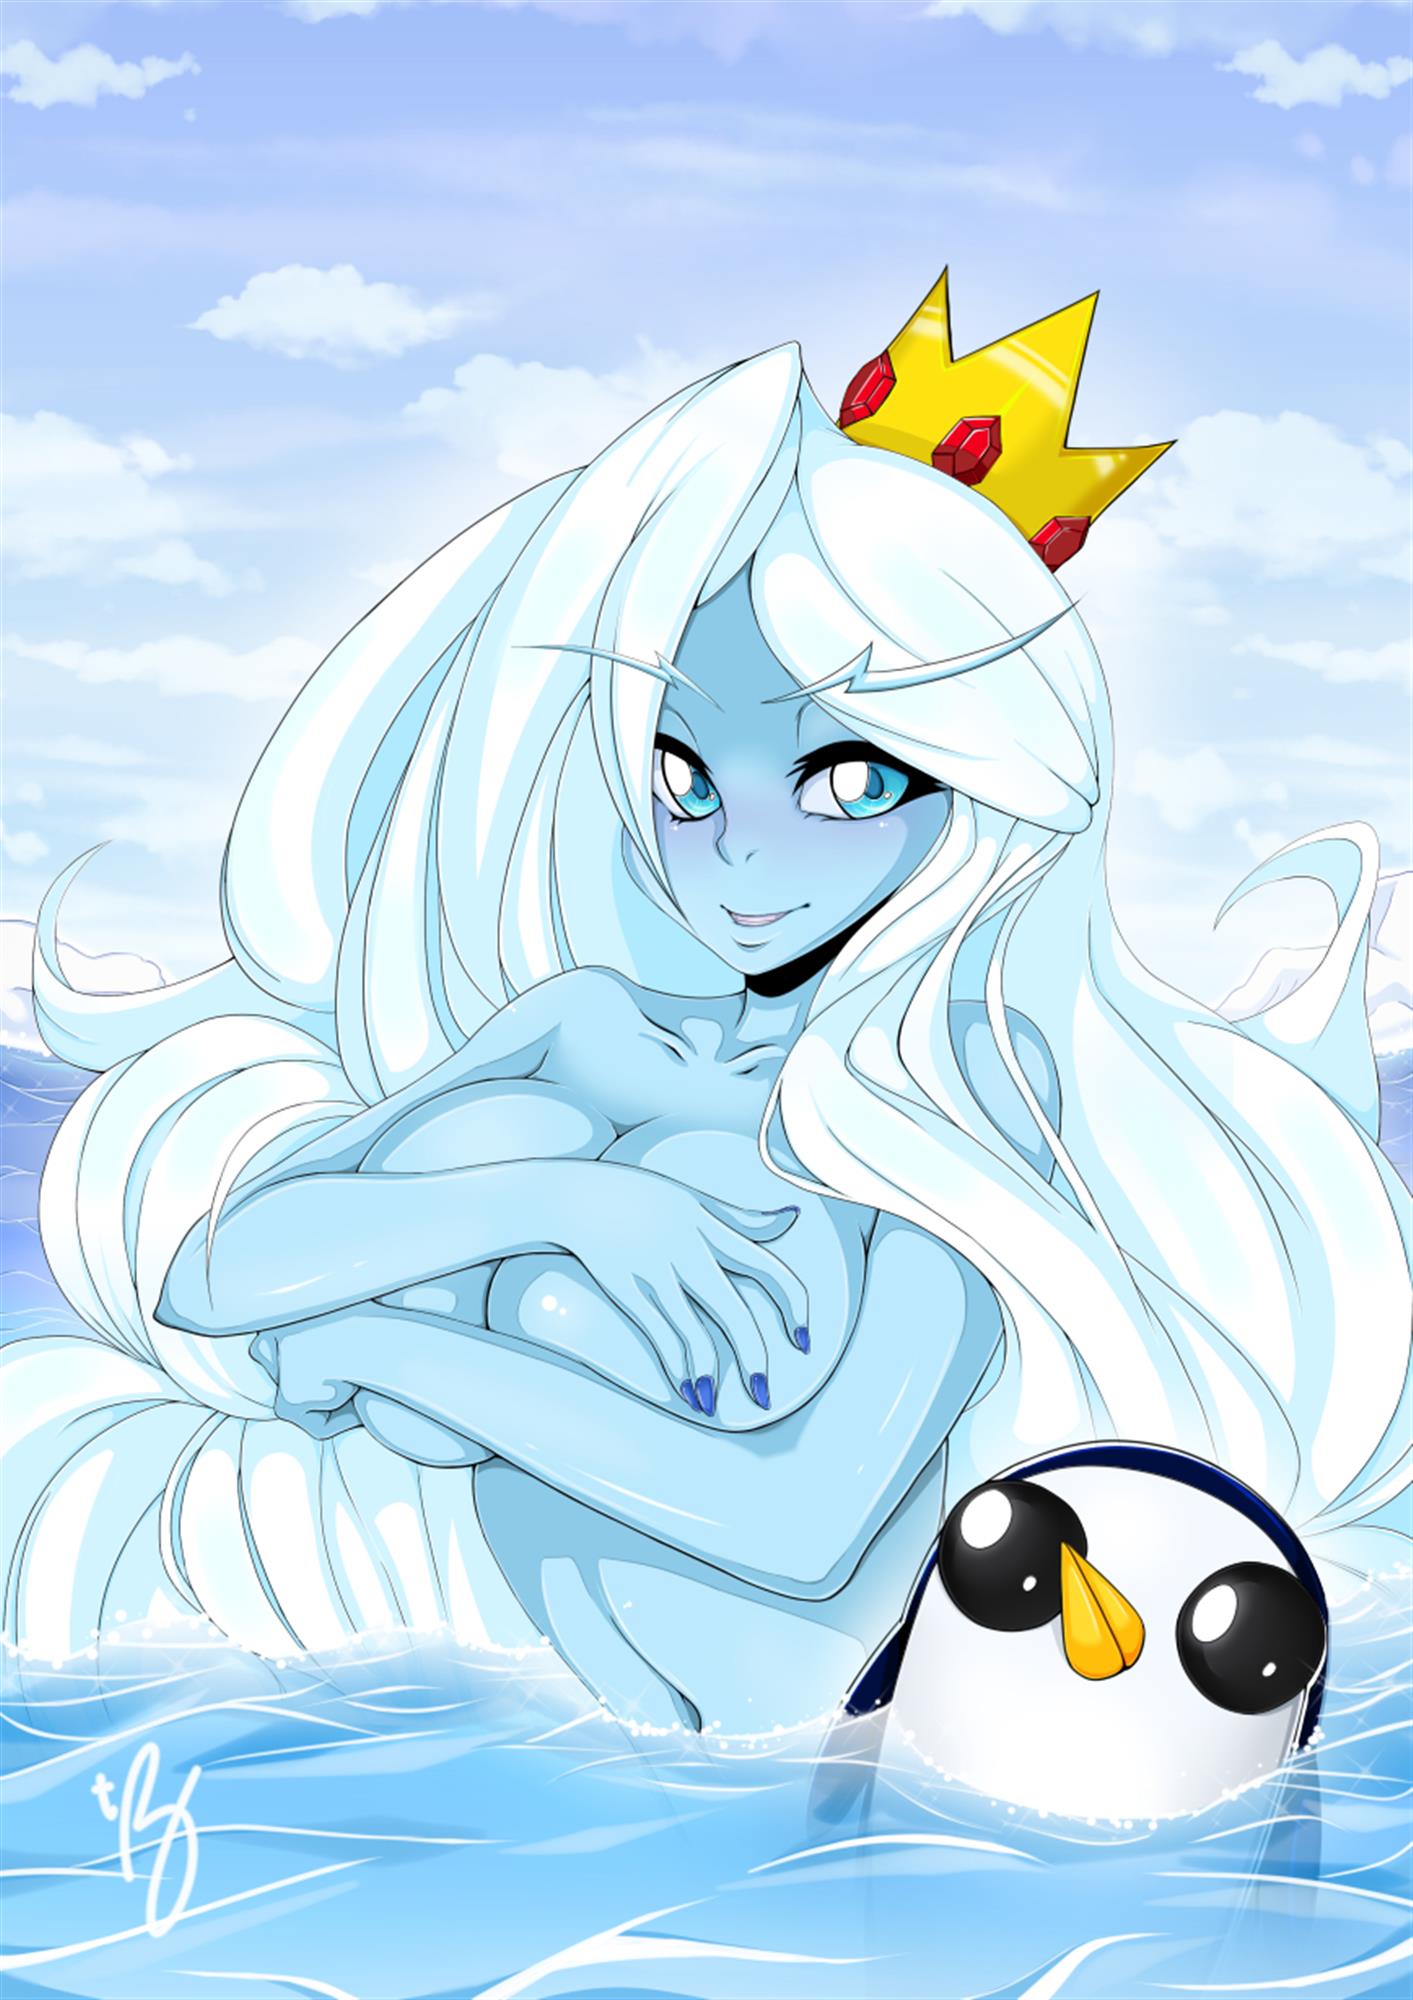 Queen naked ice 20 Times